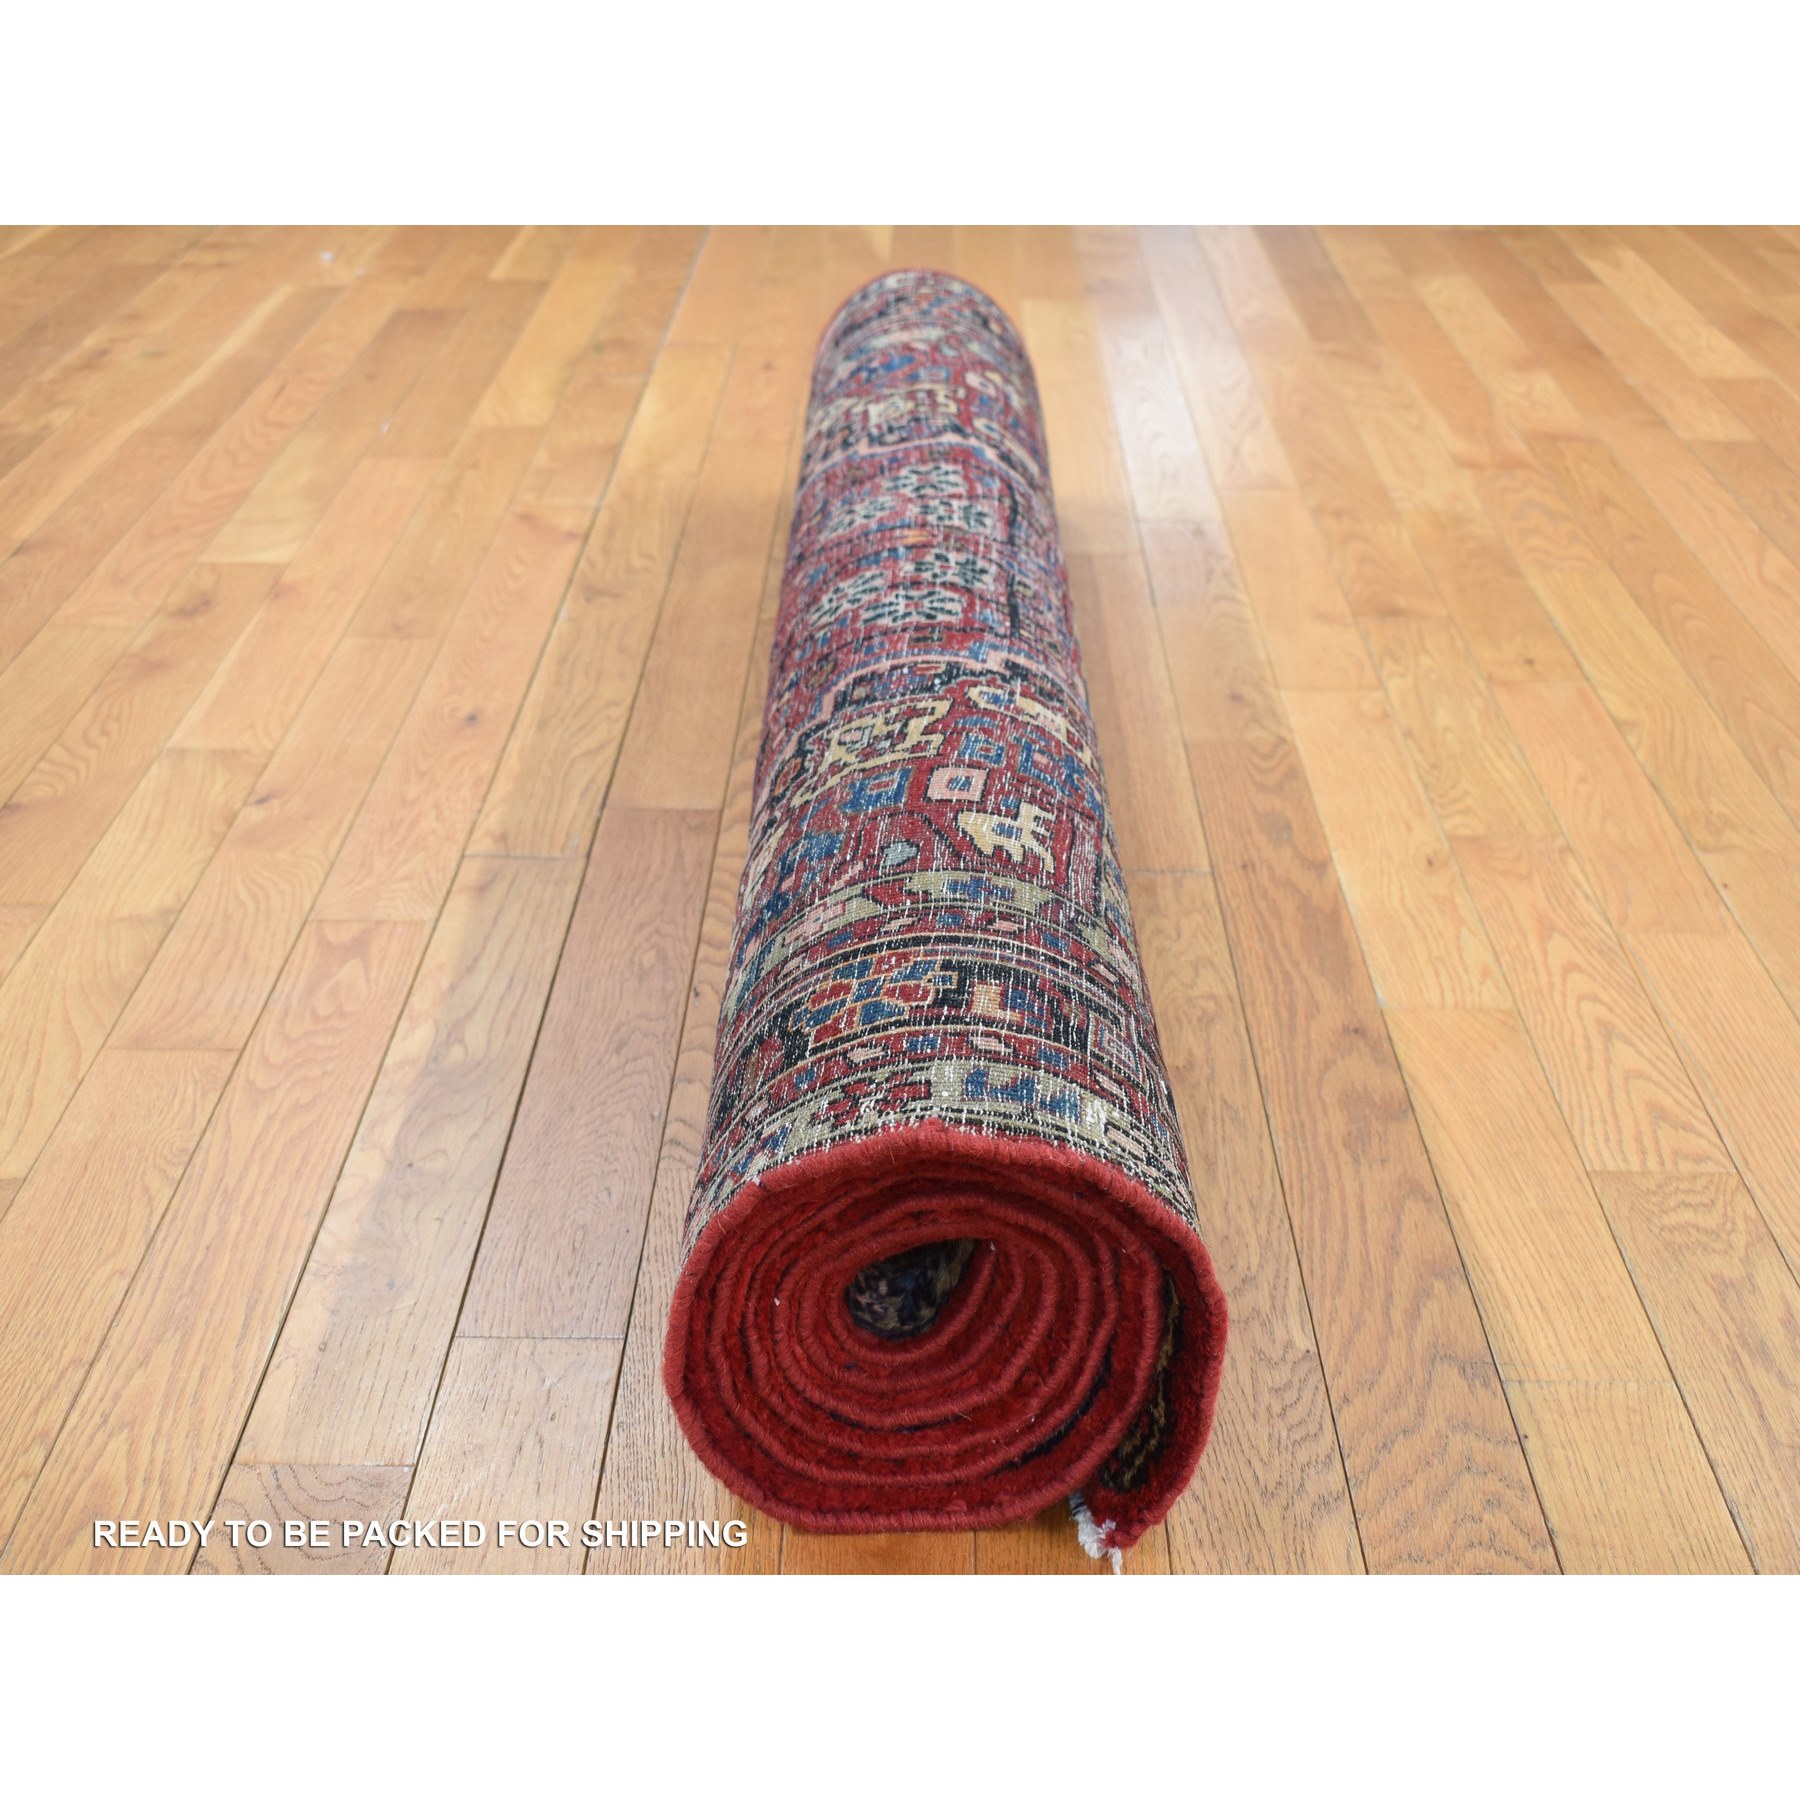 5'x8'10" Fire Brick Red, Vintage North West Persian, Pure Wool, Hand Woven, Oriental Rug 